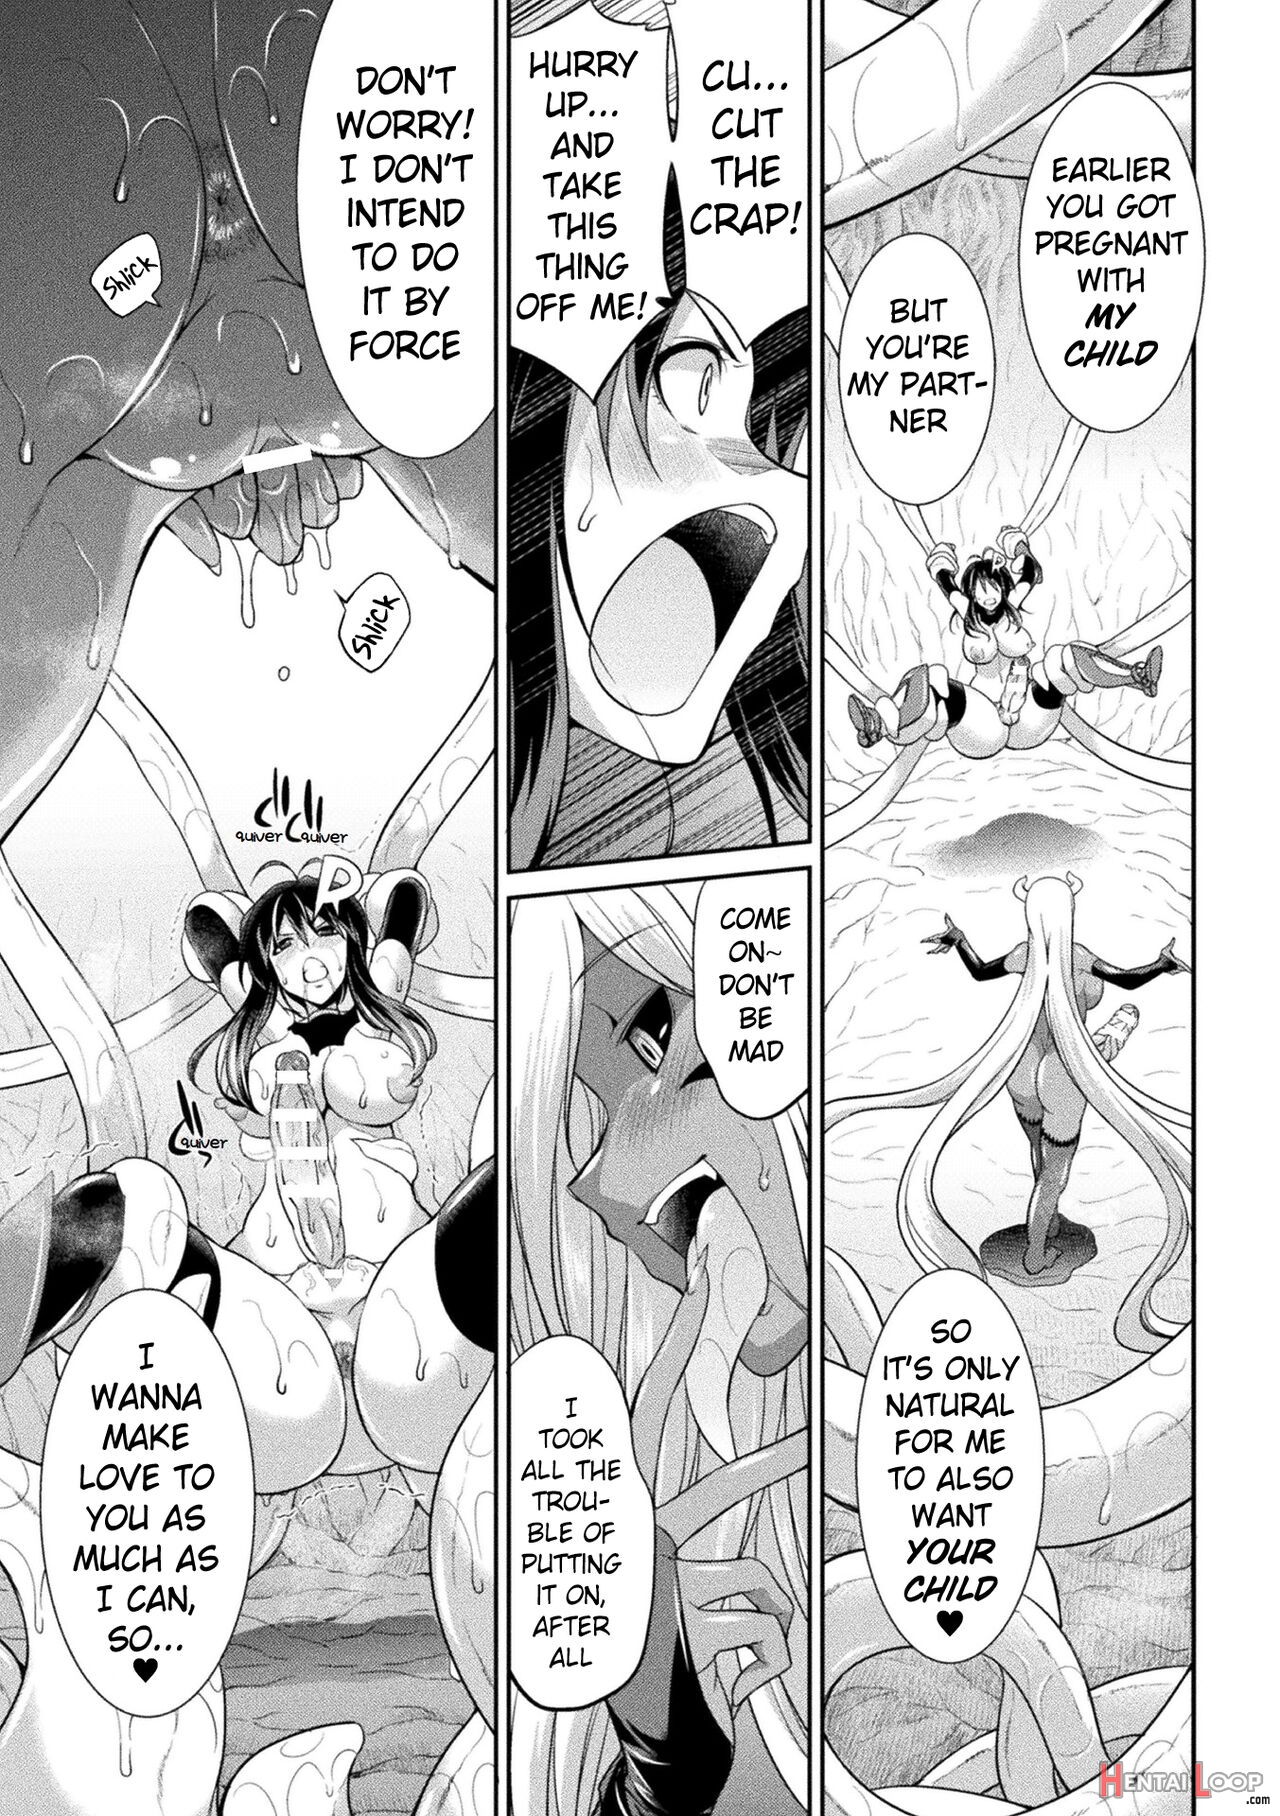 Special Duty Squadron Colorful Force Heroines Of Justice Vs The Tentacle Queen! The Great Battle Of Futa Training!? page 39